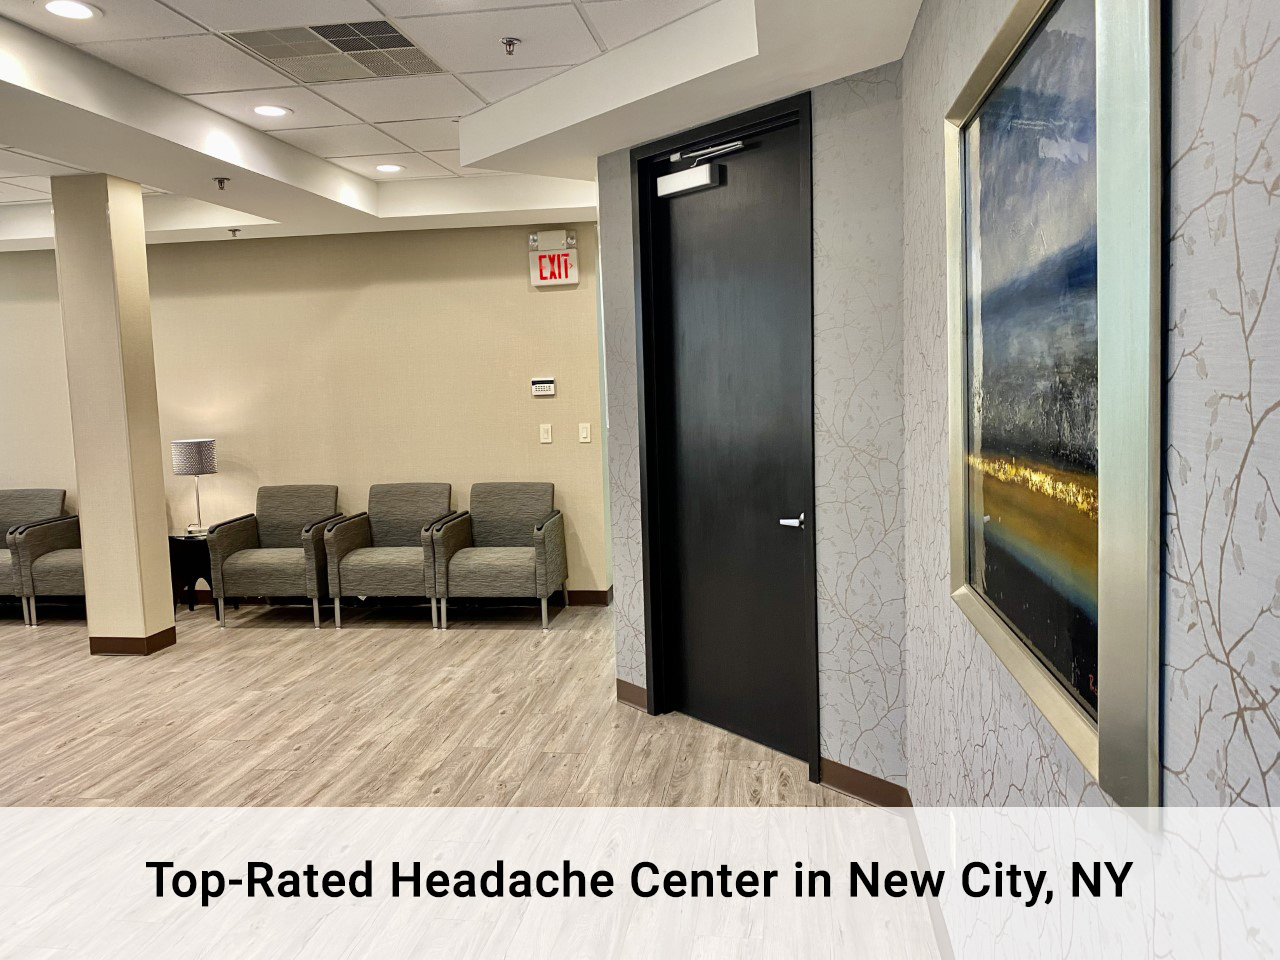 Top-Rated Headache Center in New City, NY